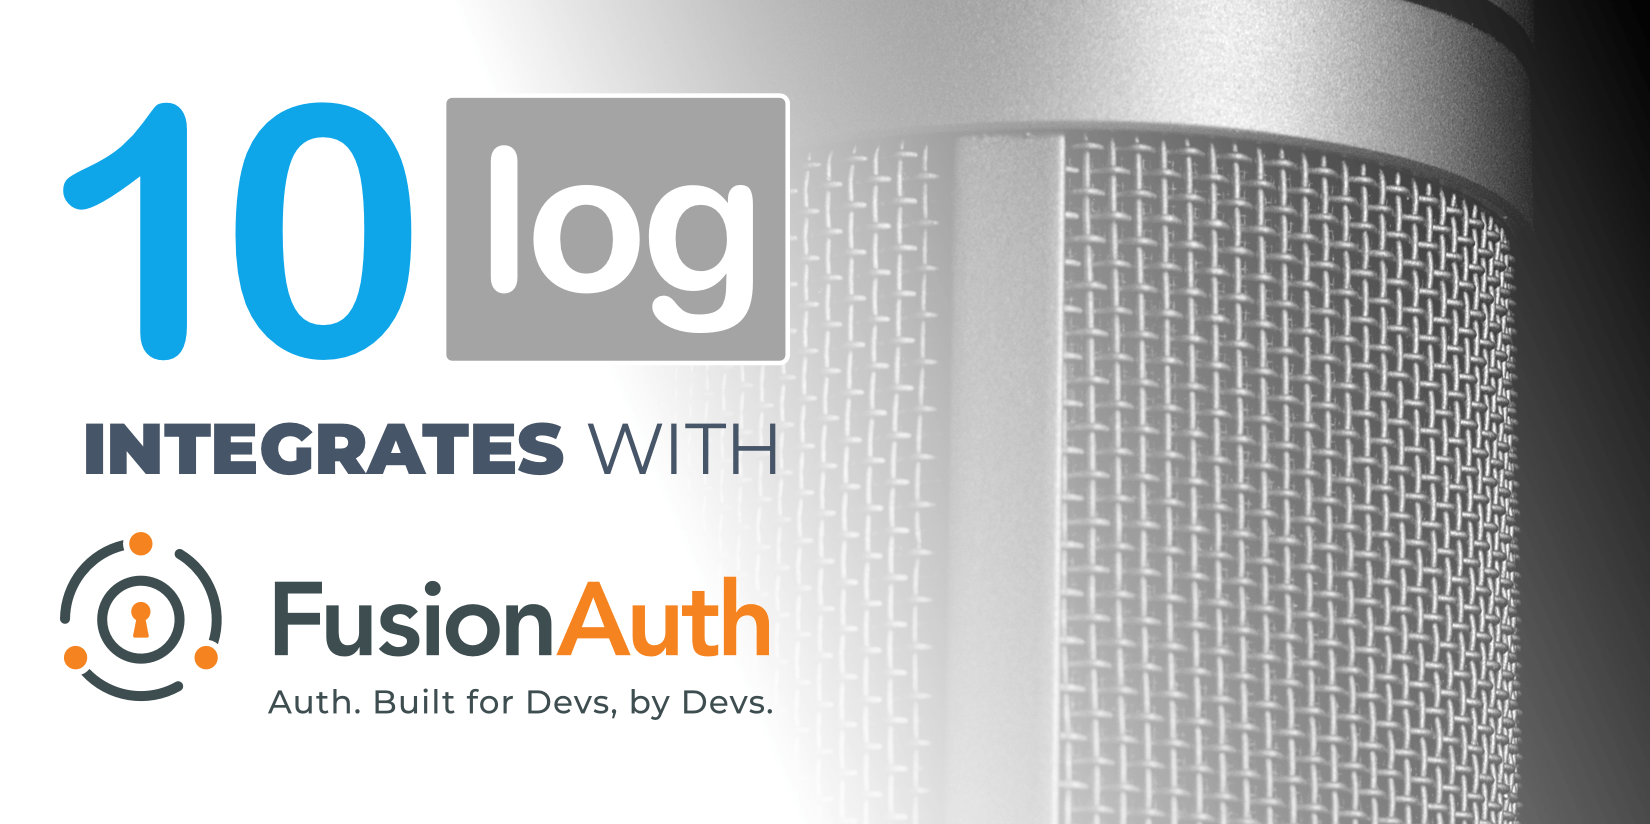 10log integrates FusionAuth into their architectural acoustics applications